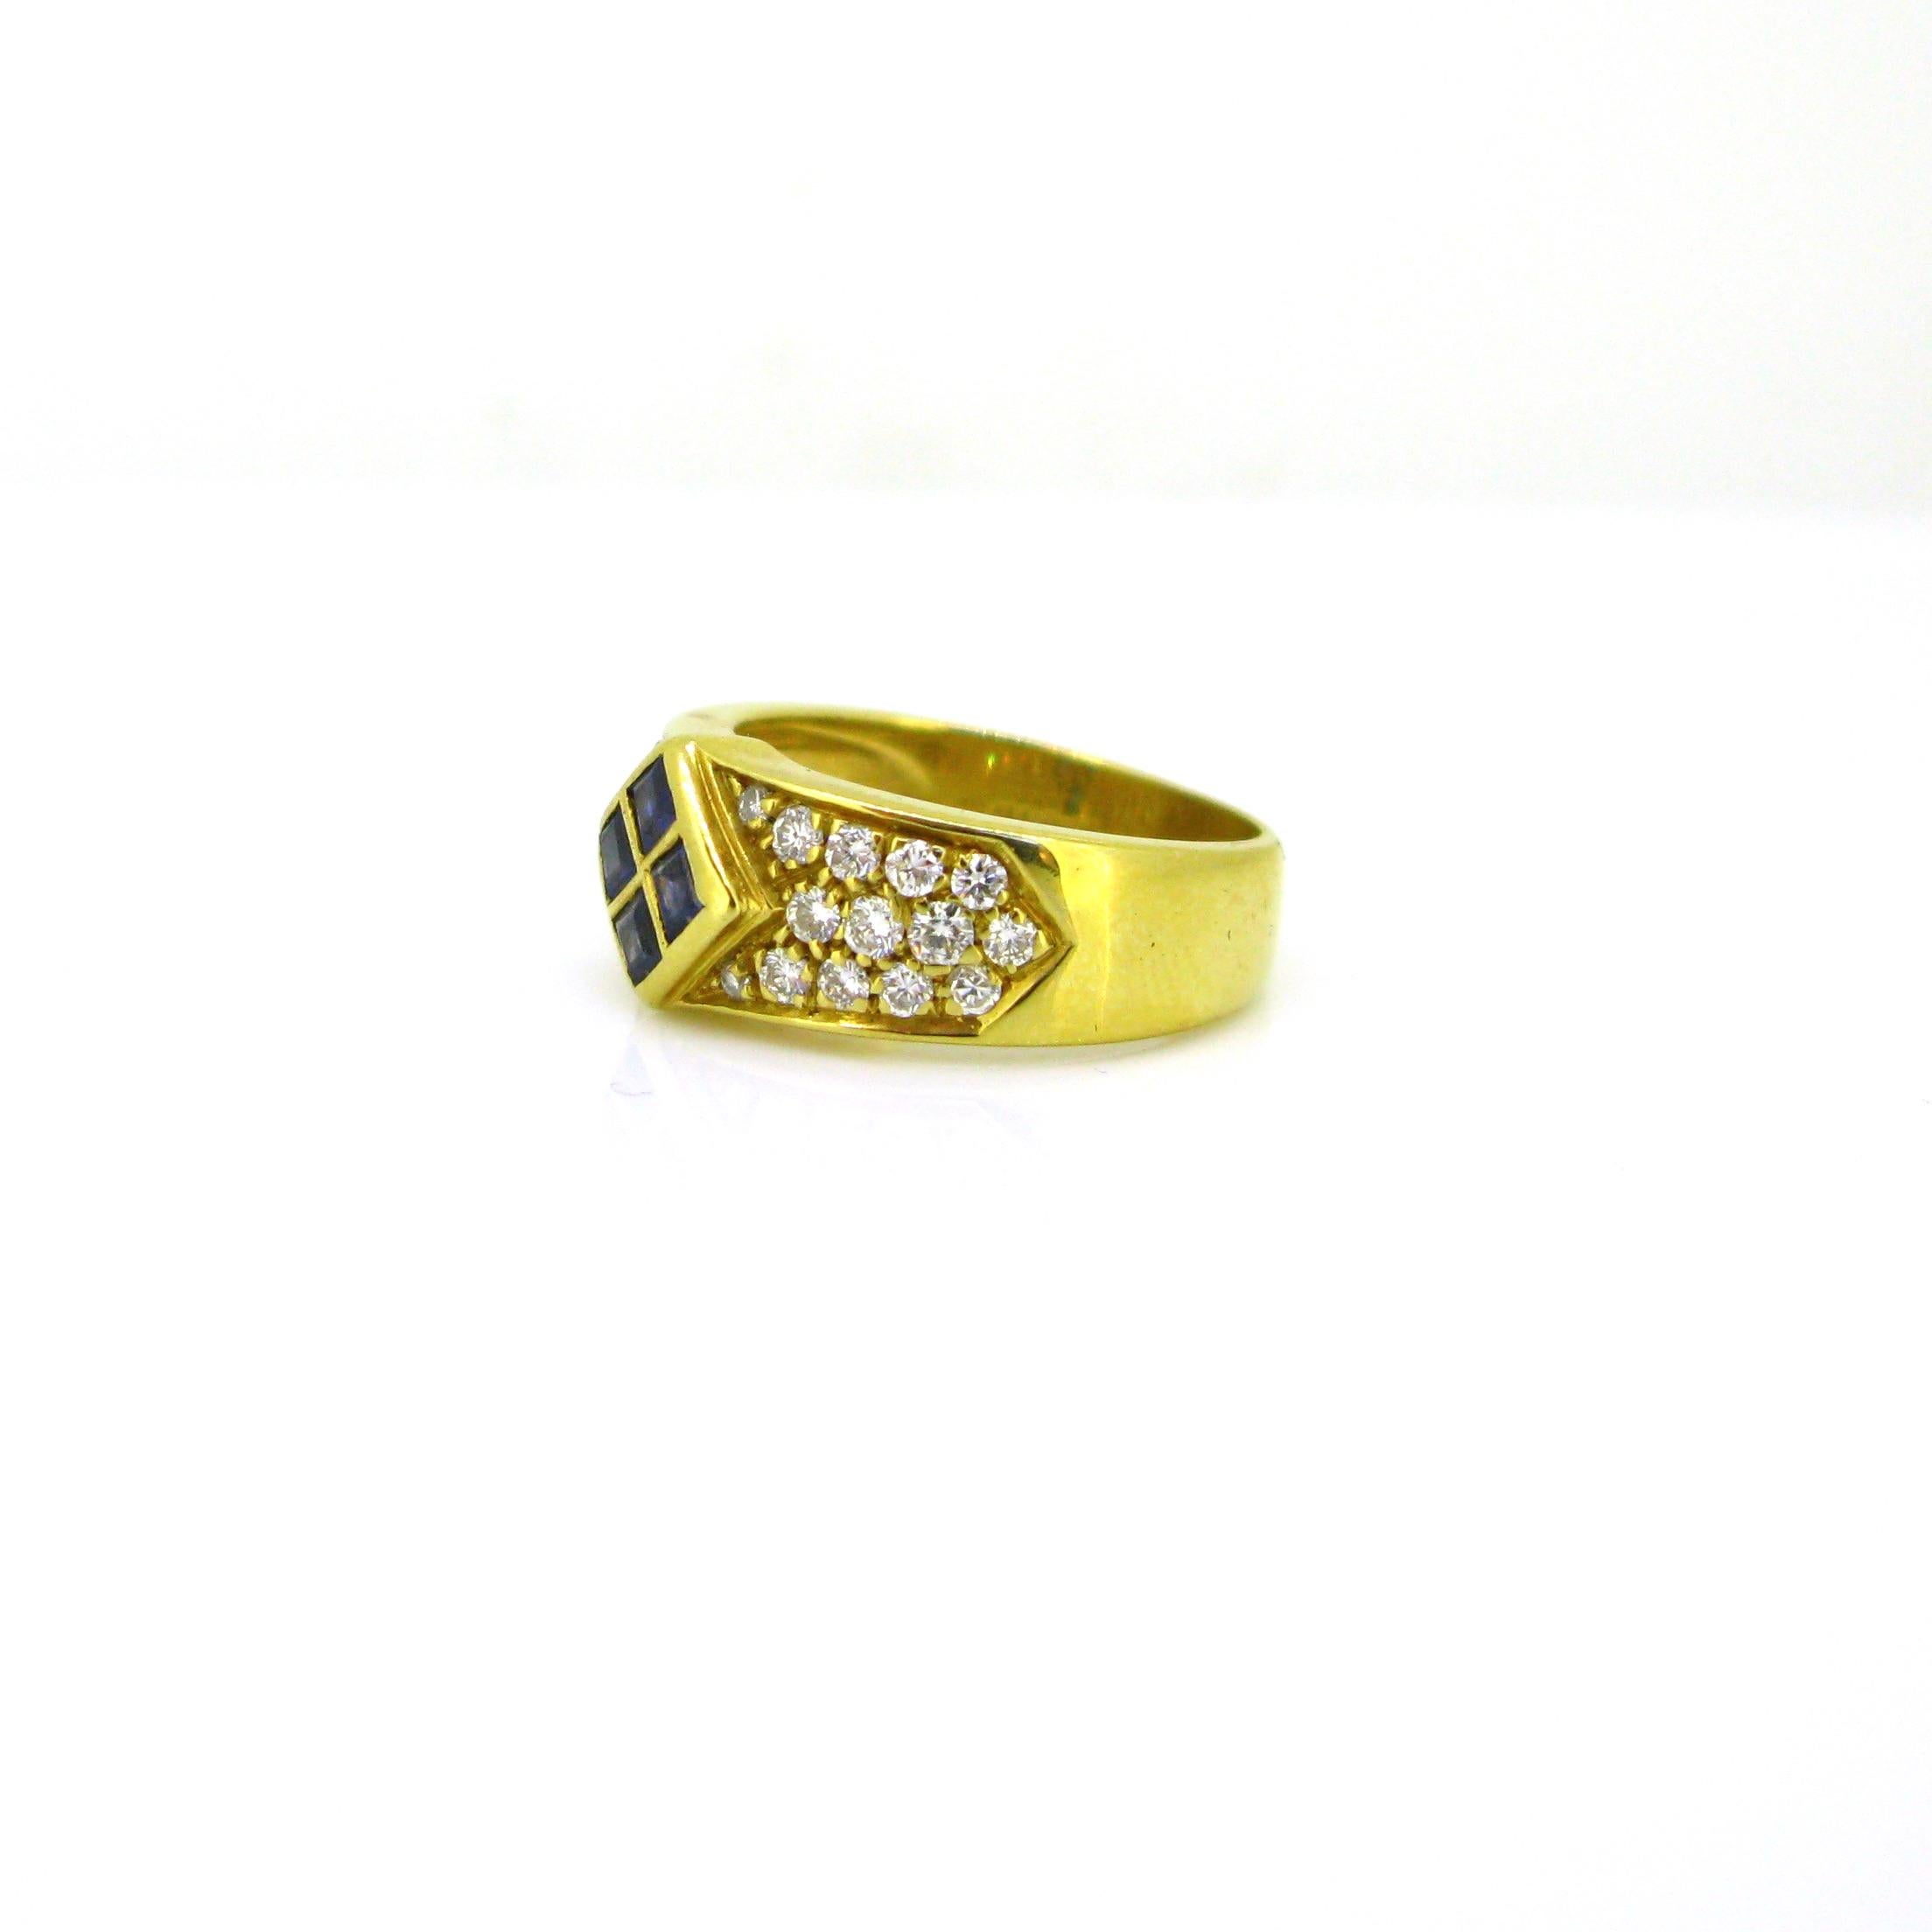 Women's or Men's Sapphires and Diamonds Band Ring by Aldebert, 18kt Yellow Gold, France